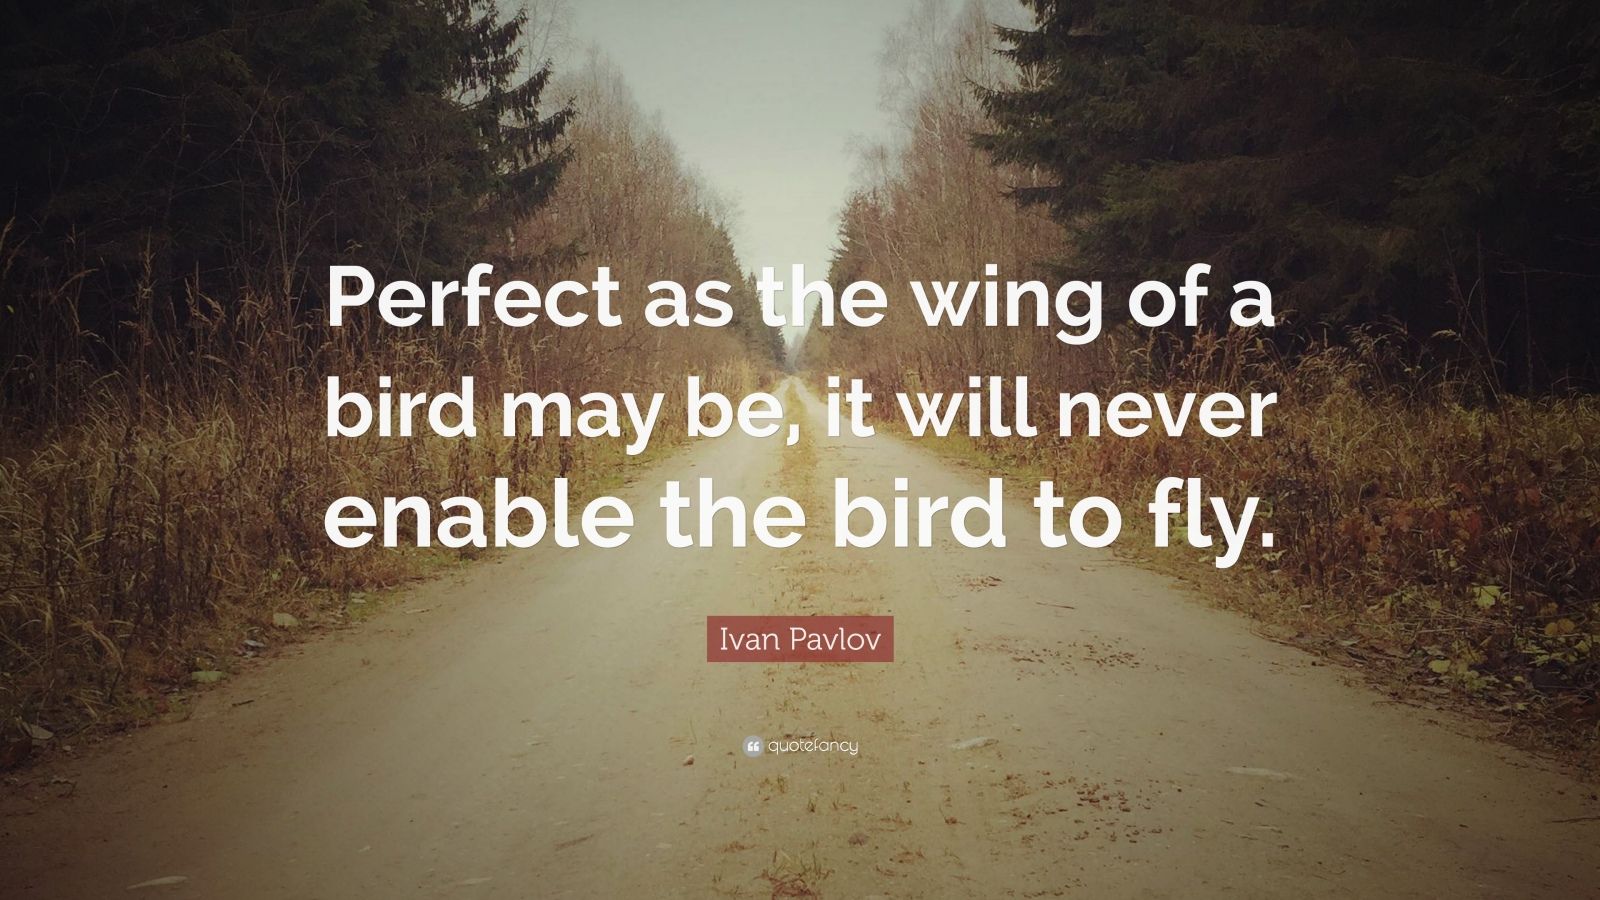 Ivan Pavlov Quote: “Perfect as the wing of a bird may be, it will never ...